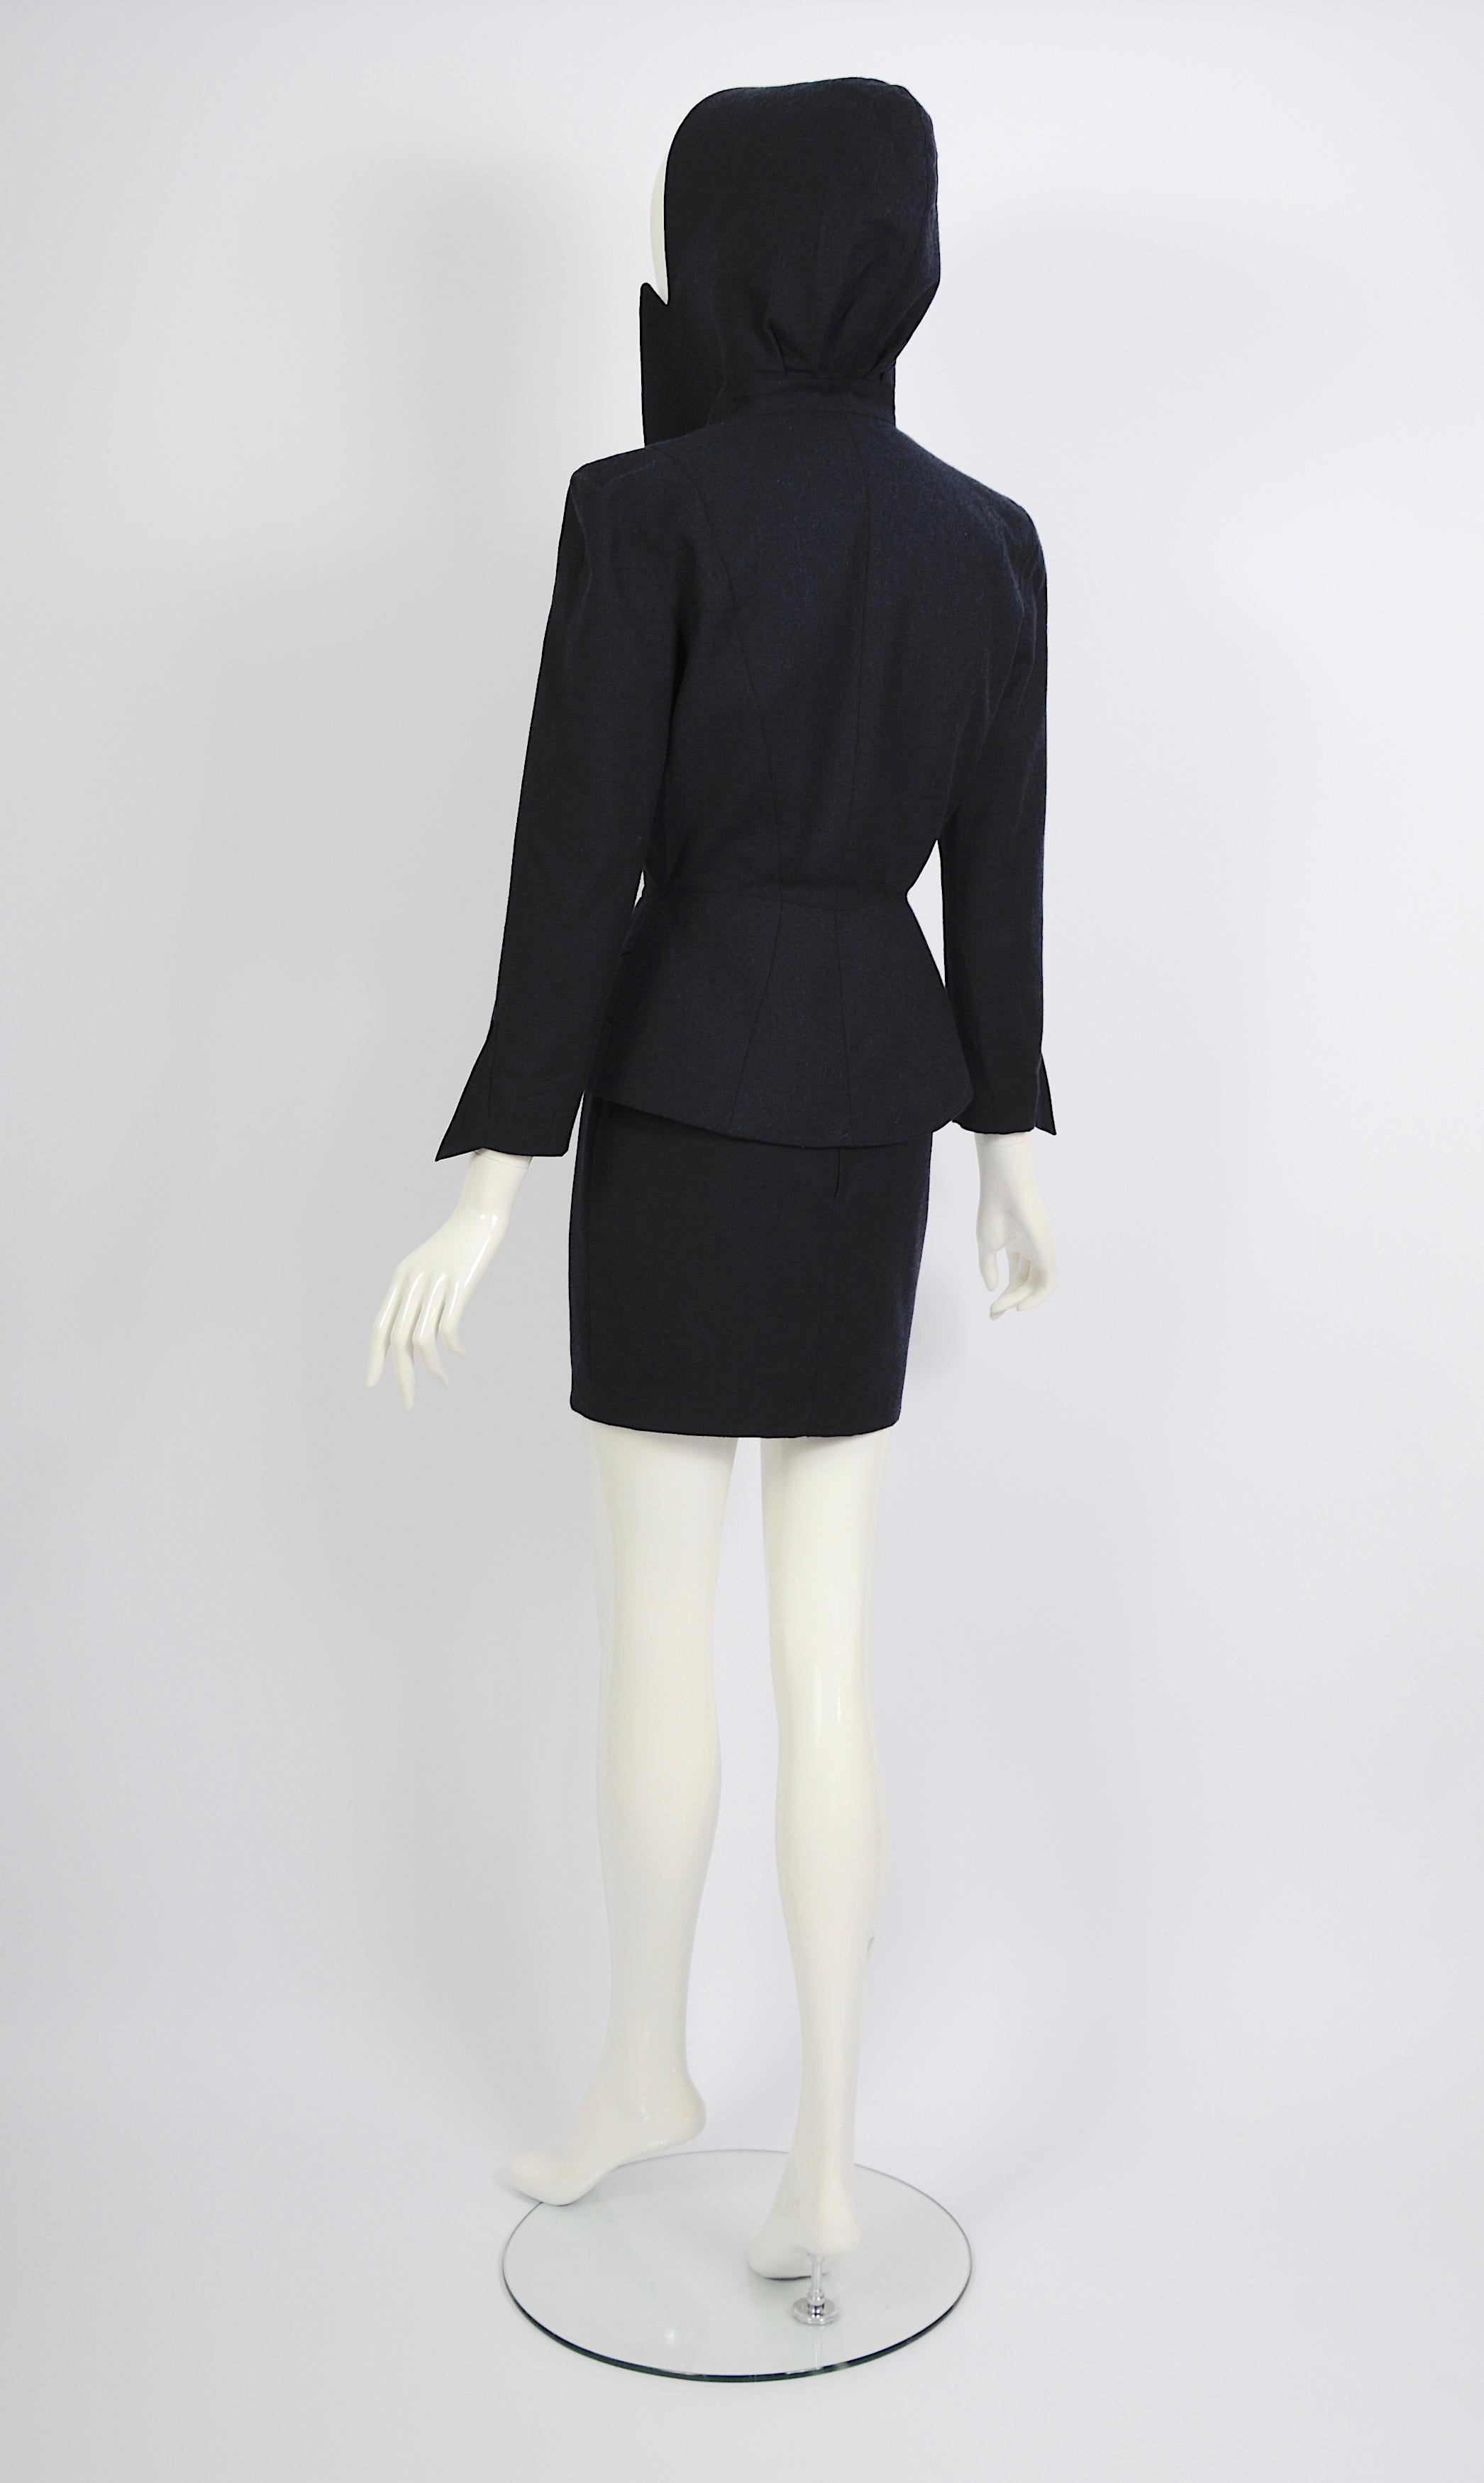 Thierry Mugler FW 1991 shiva collection blue wool hooded jacket & skirt set  For Sale 4